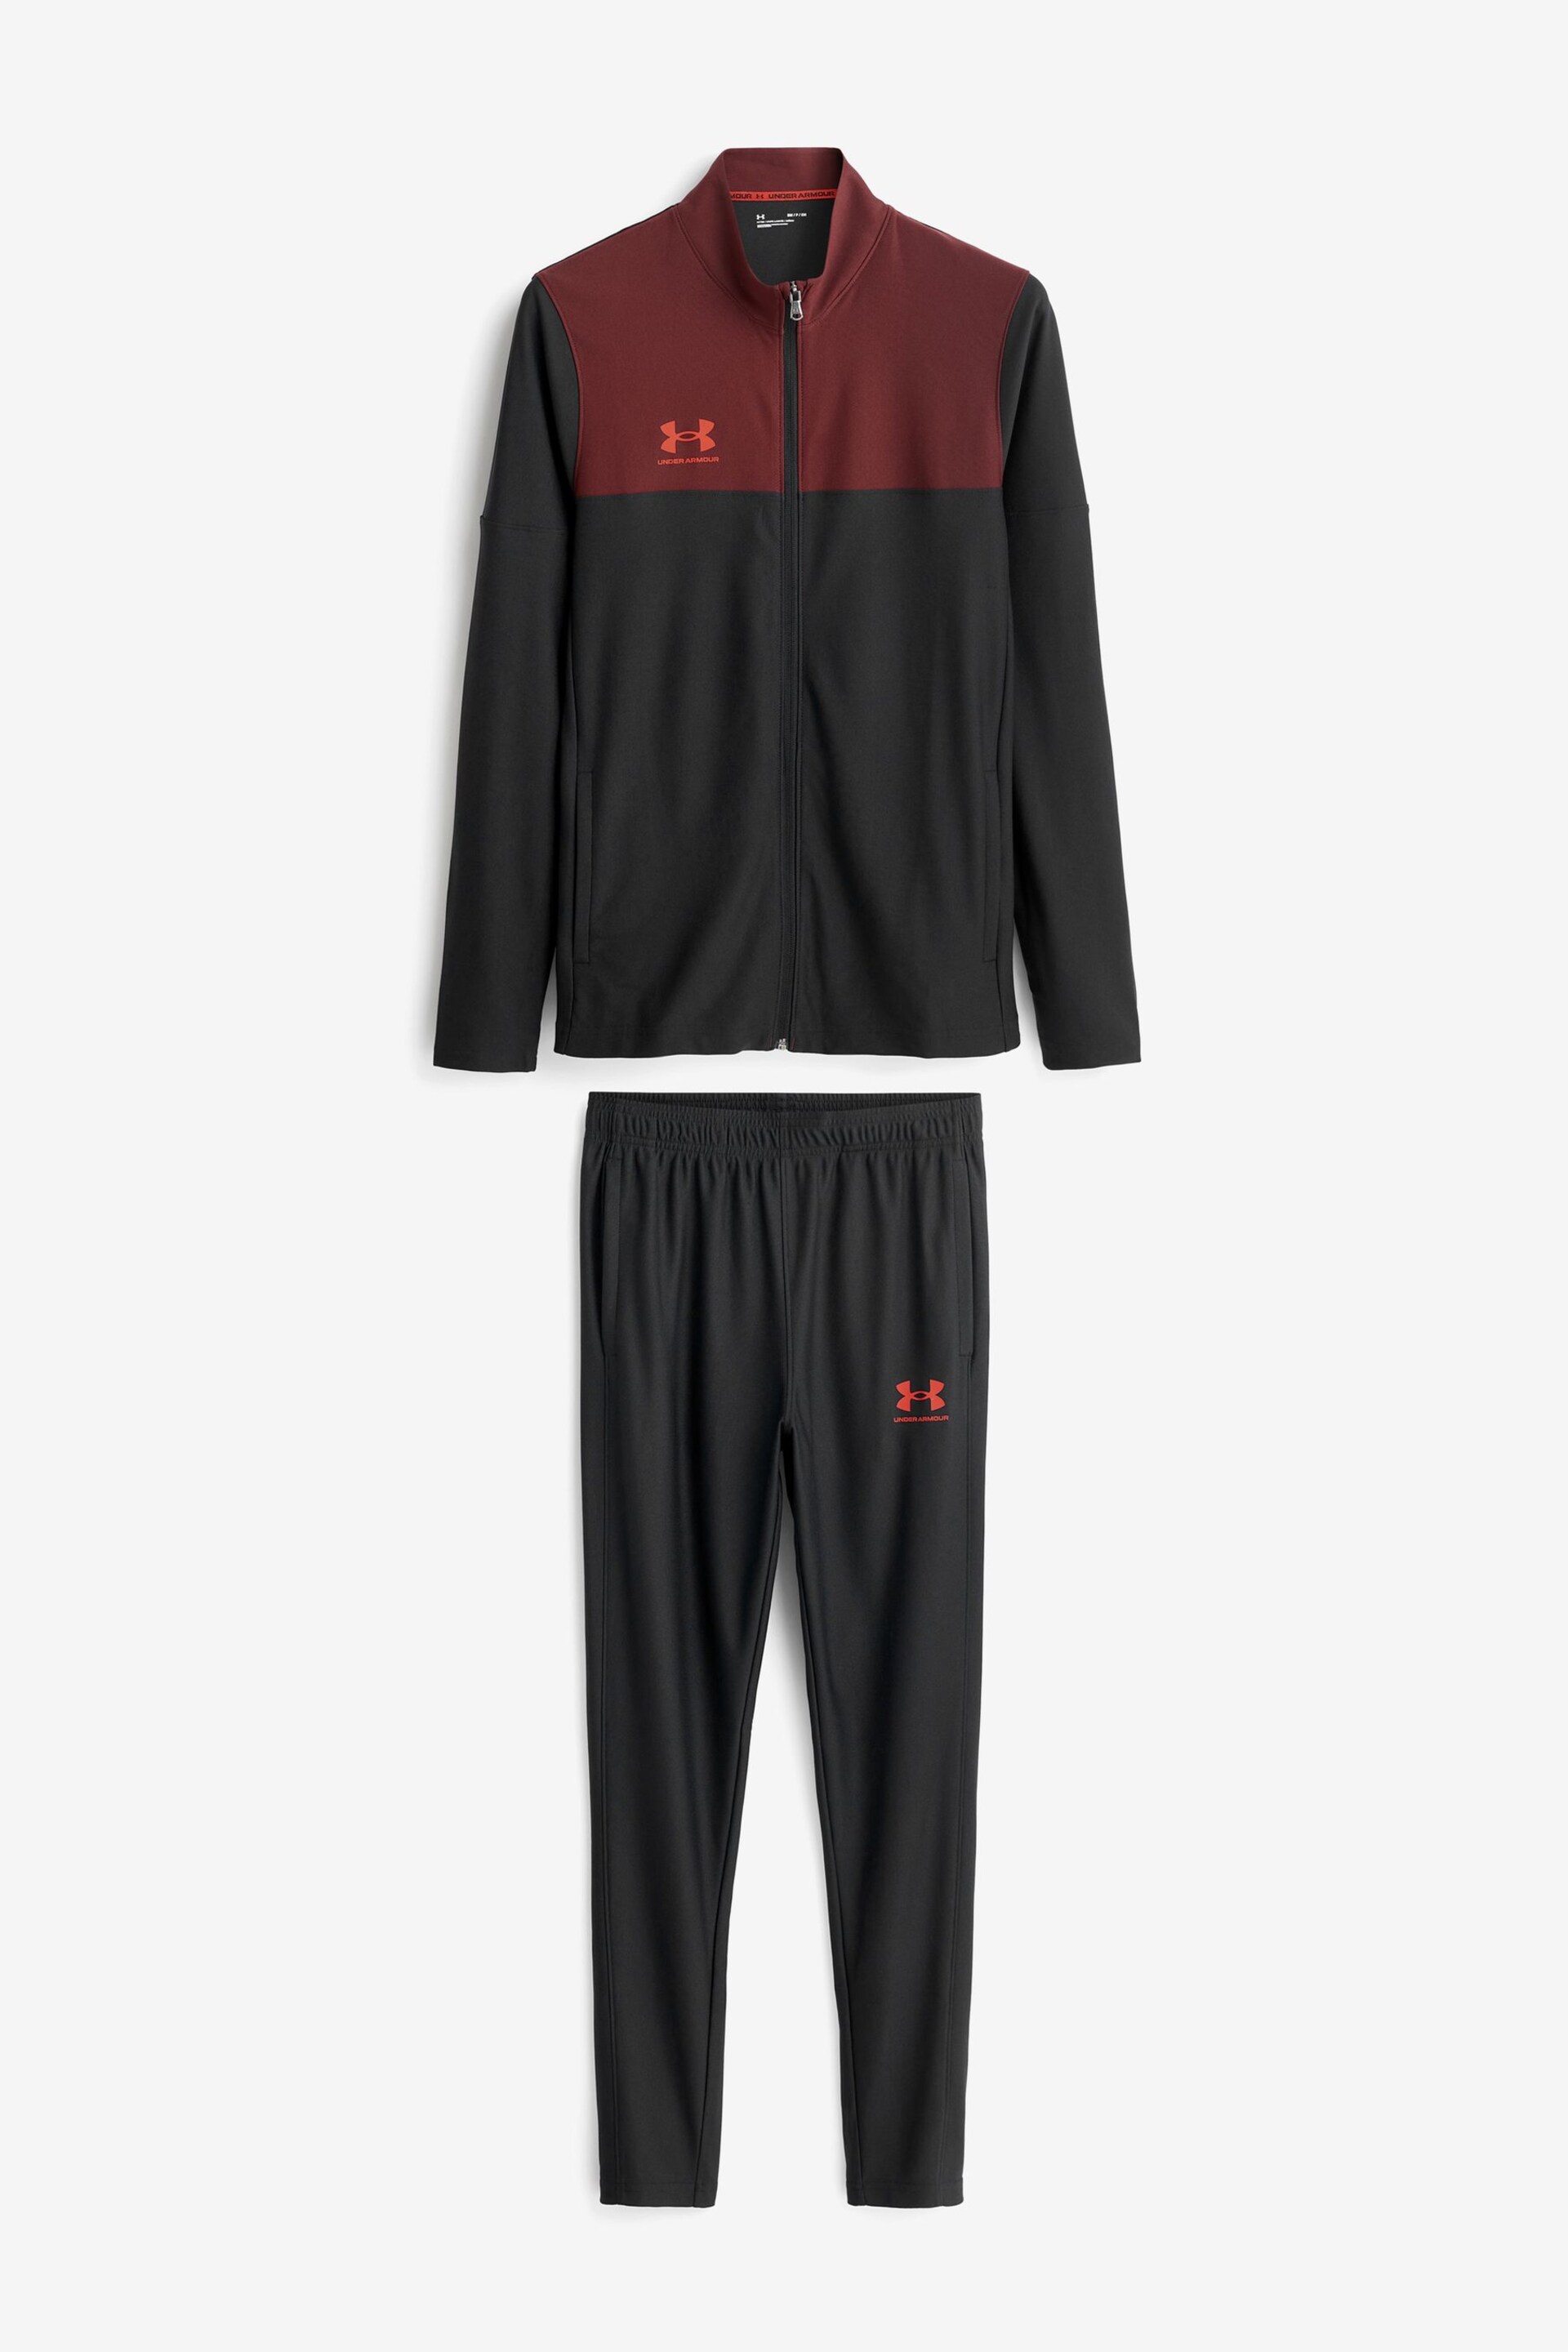 Under Armour Black/Red Challenger Football Tracksuit - Image 5 of 7